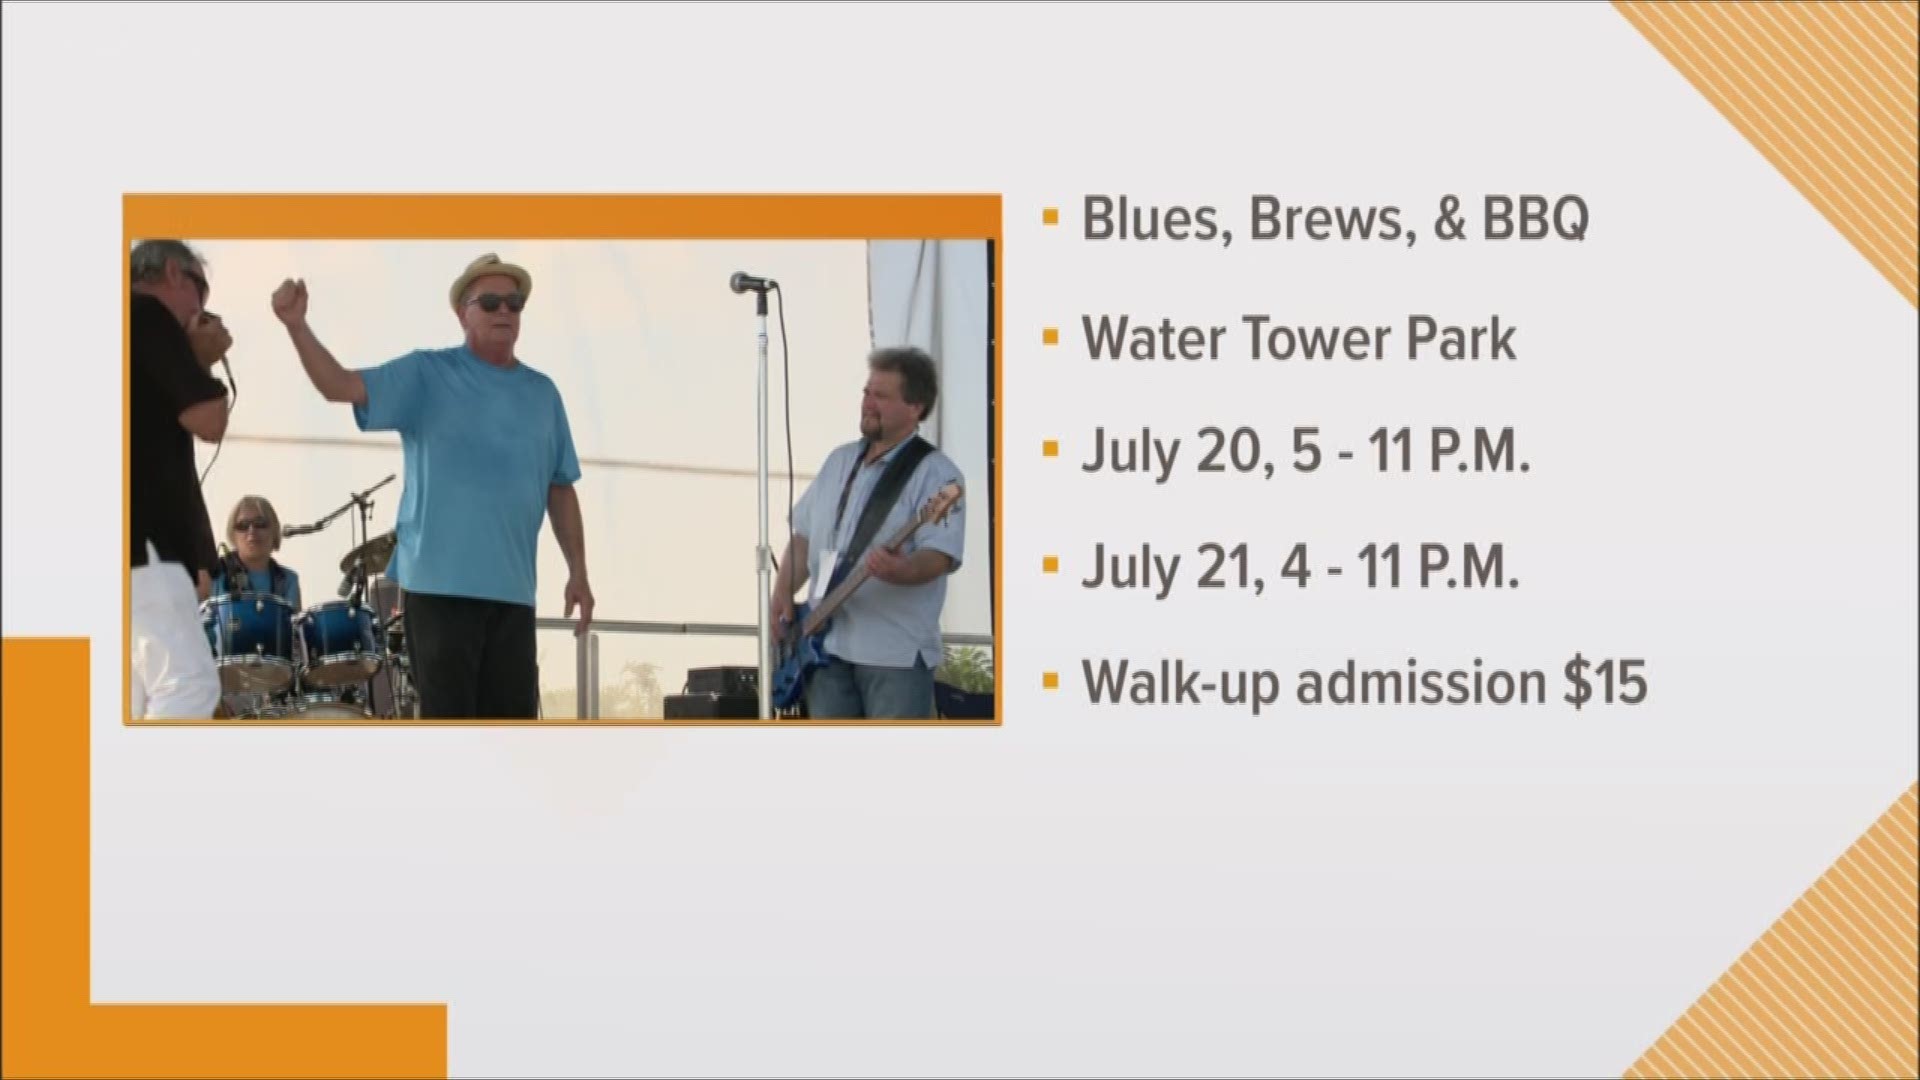 Blues, Brews and BBQ festival kicking off the weekend